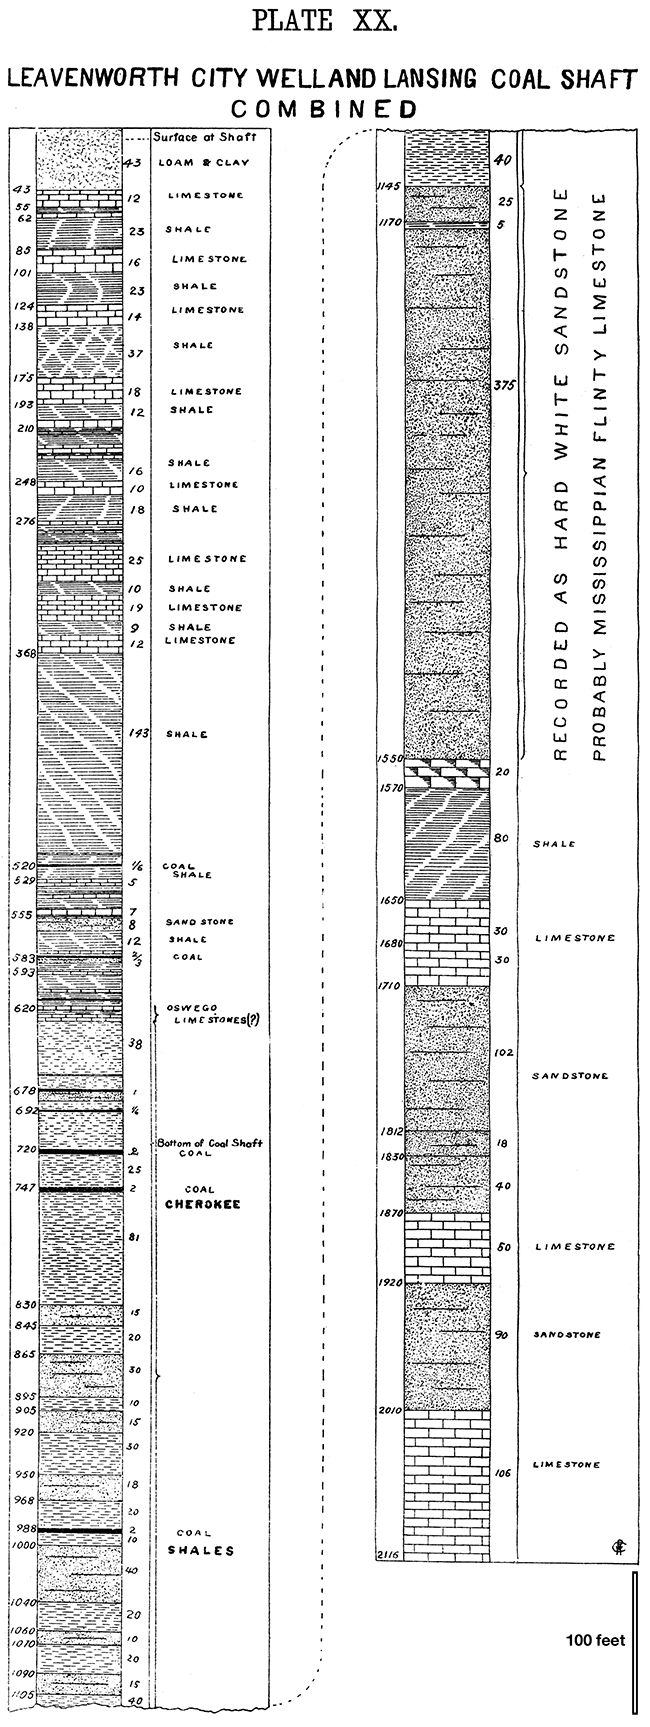 Stratigraphic columns from the Leavenworth well.